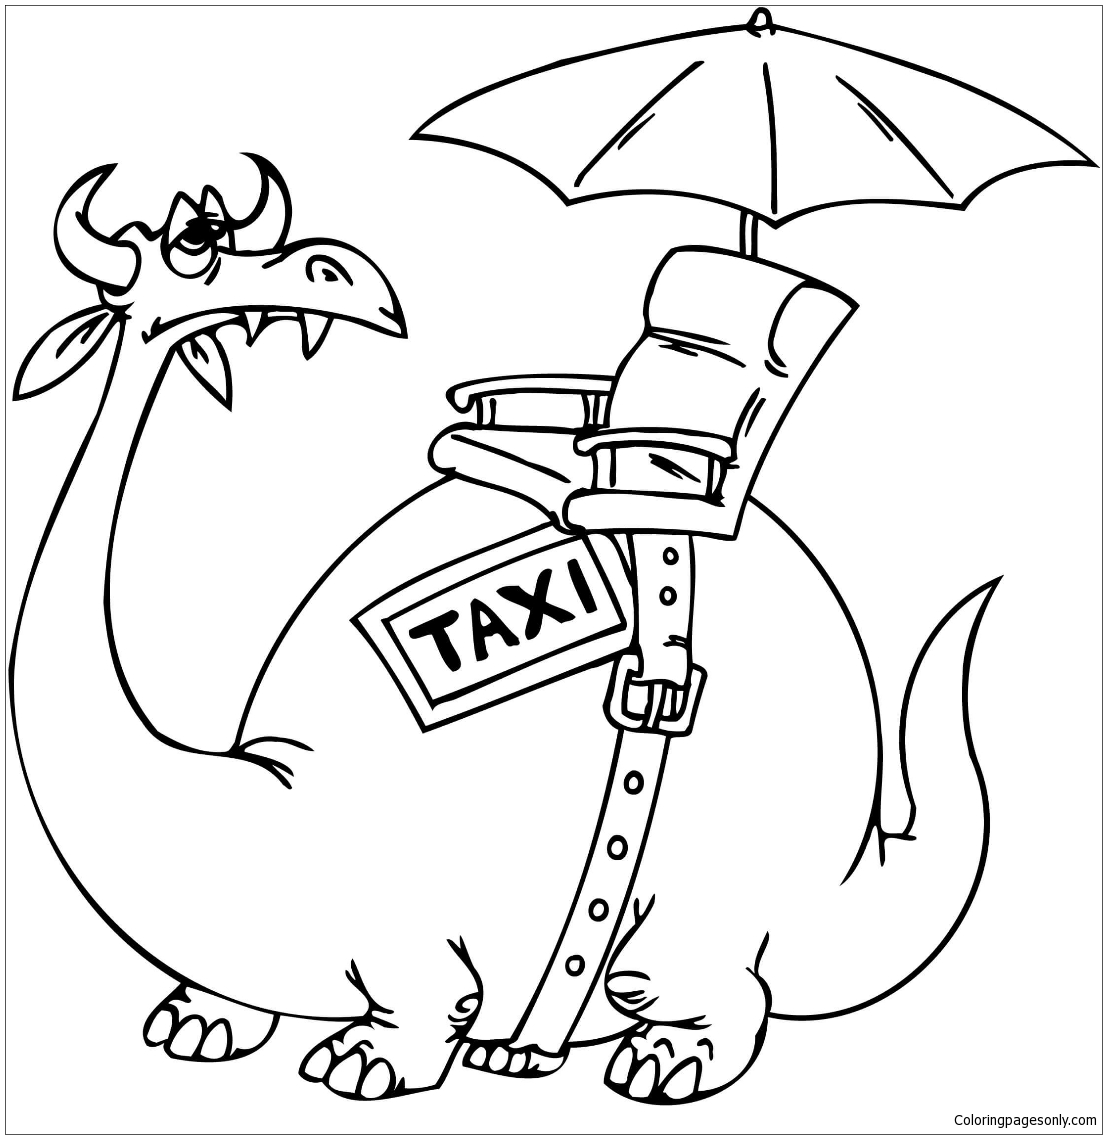 Taxi Dragon Coloring Page - Free Coloring Pages Online